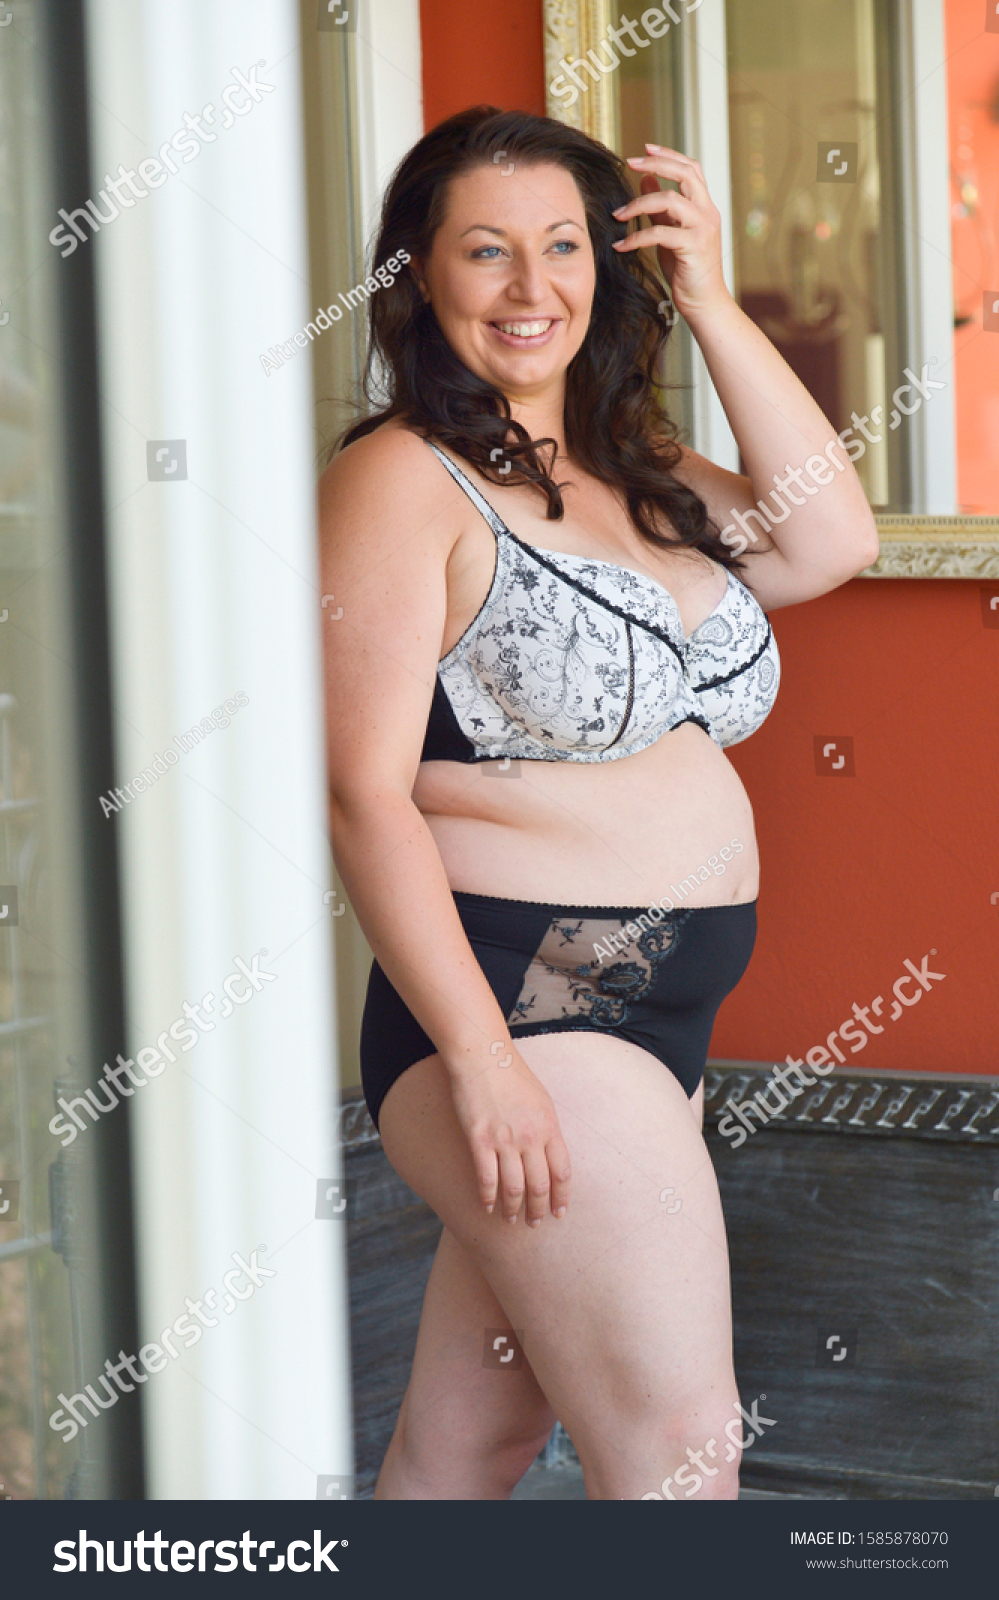 stock-photo-mid-adult-woman-in-lingerie-smiling-1585878070.jpg